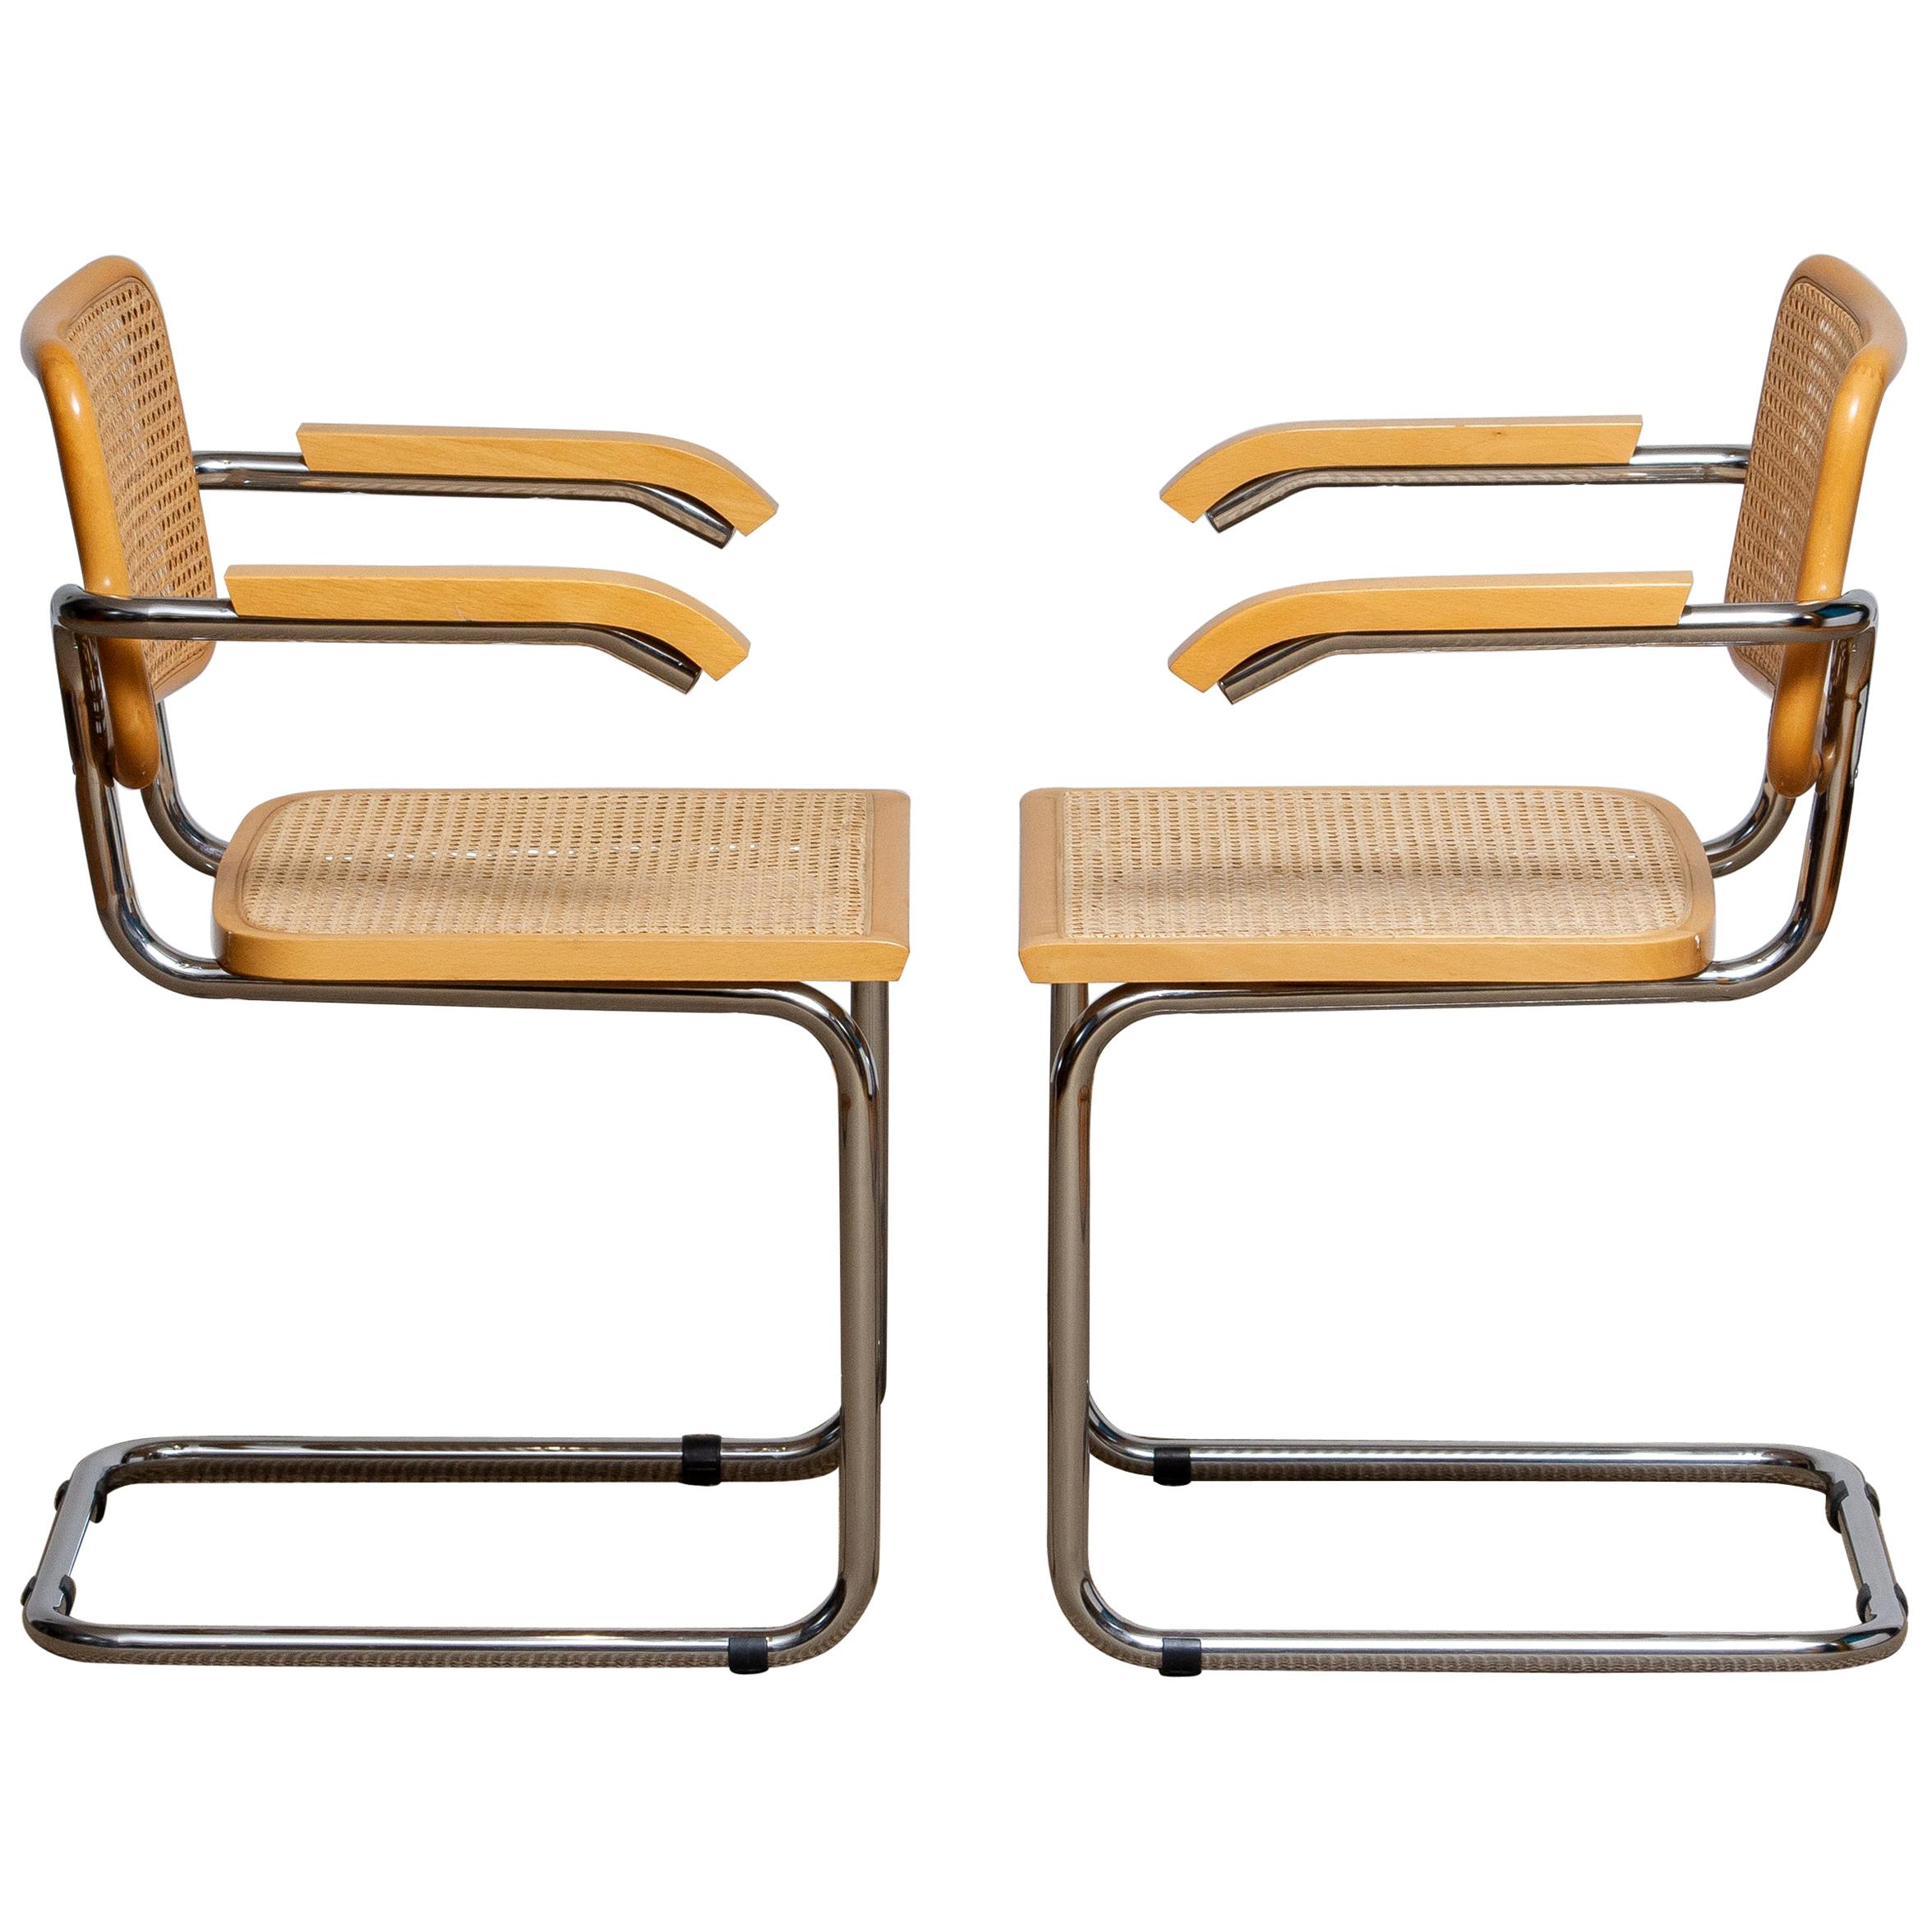 Pair of Marcel Breuer Cane or Chrome and Gold Beech Cesca S64 Chairs, Italy